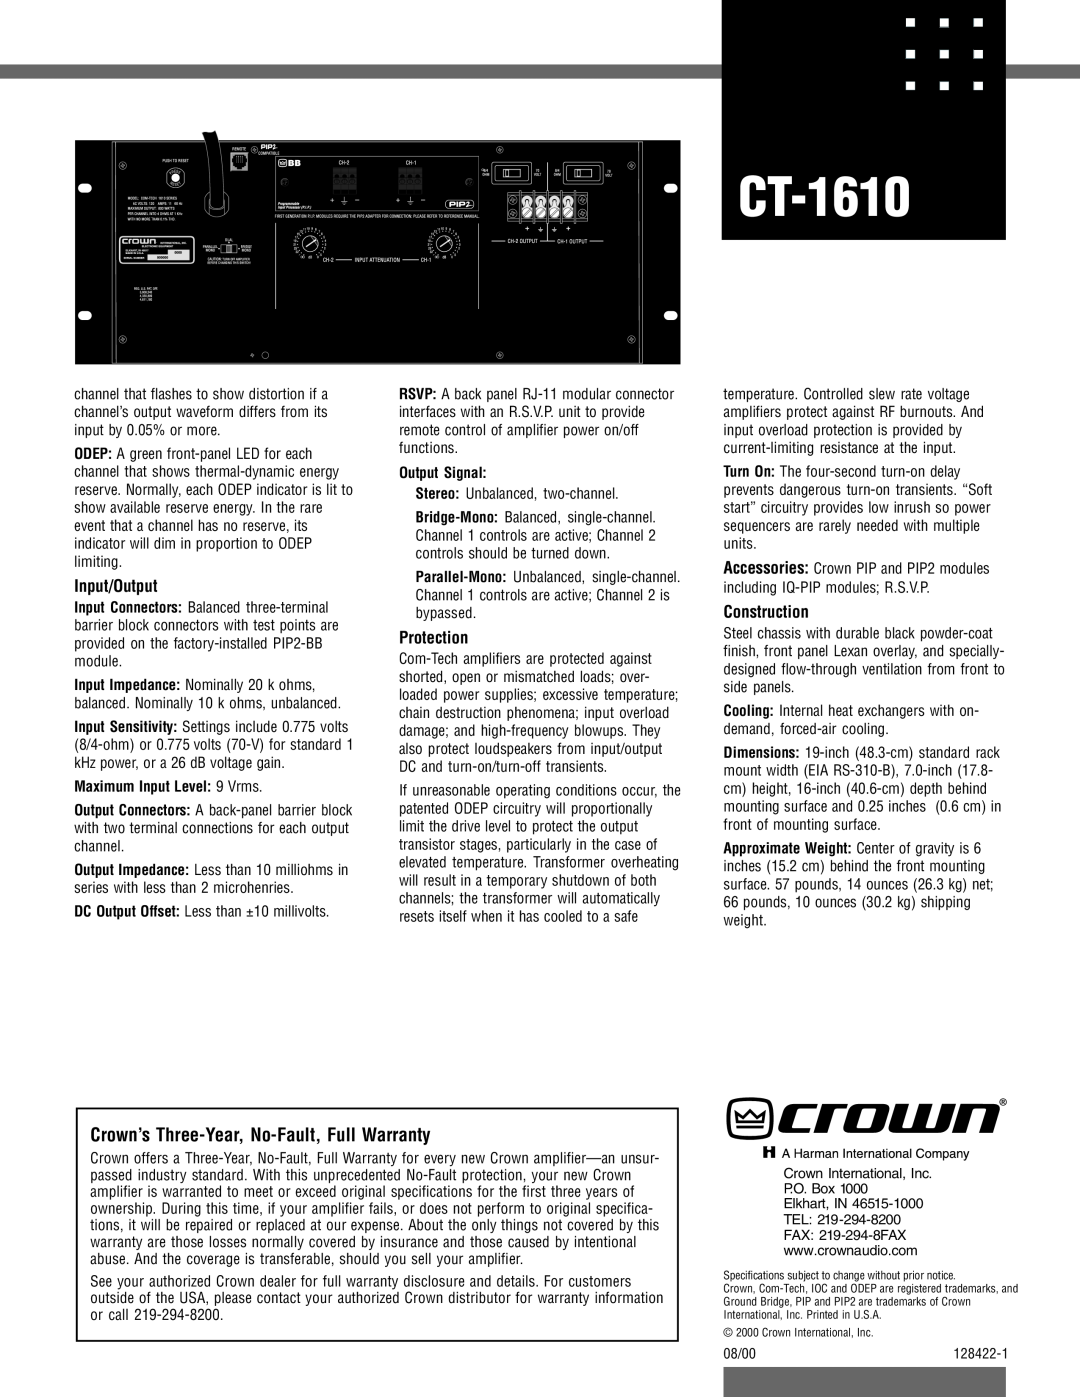 Crown Audio CT-1610 specifications Crown’s Three-Year, No-Fault,Full Warranty, Input/Output, Protection, Construction 